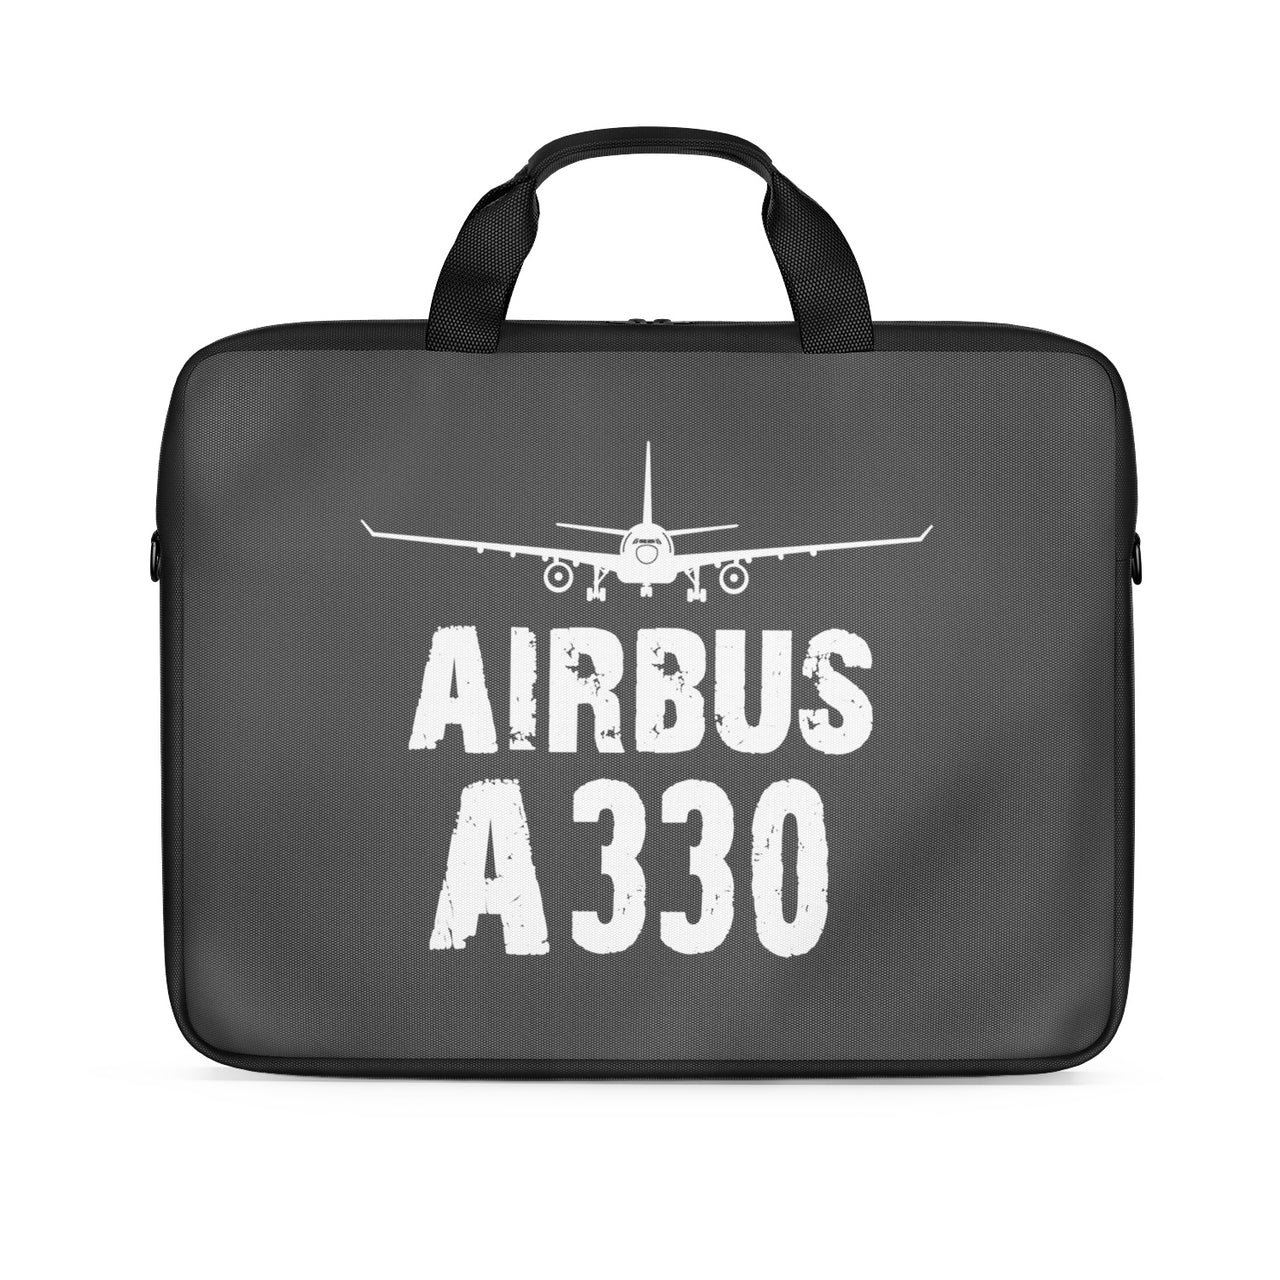 Airbus A330 & Plane Designed Laptop & Tablet Bags